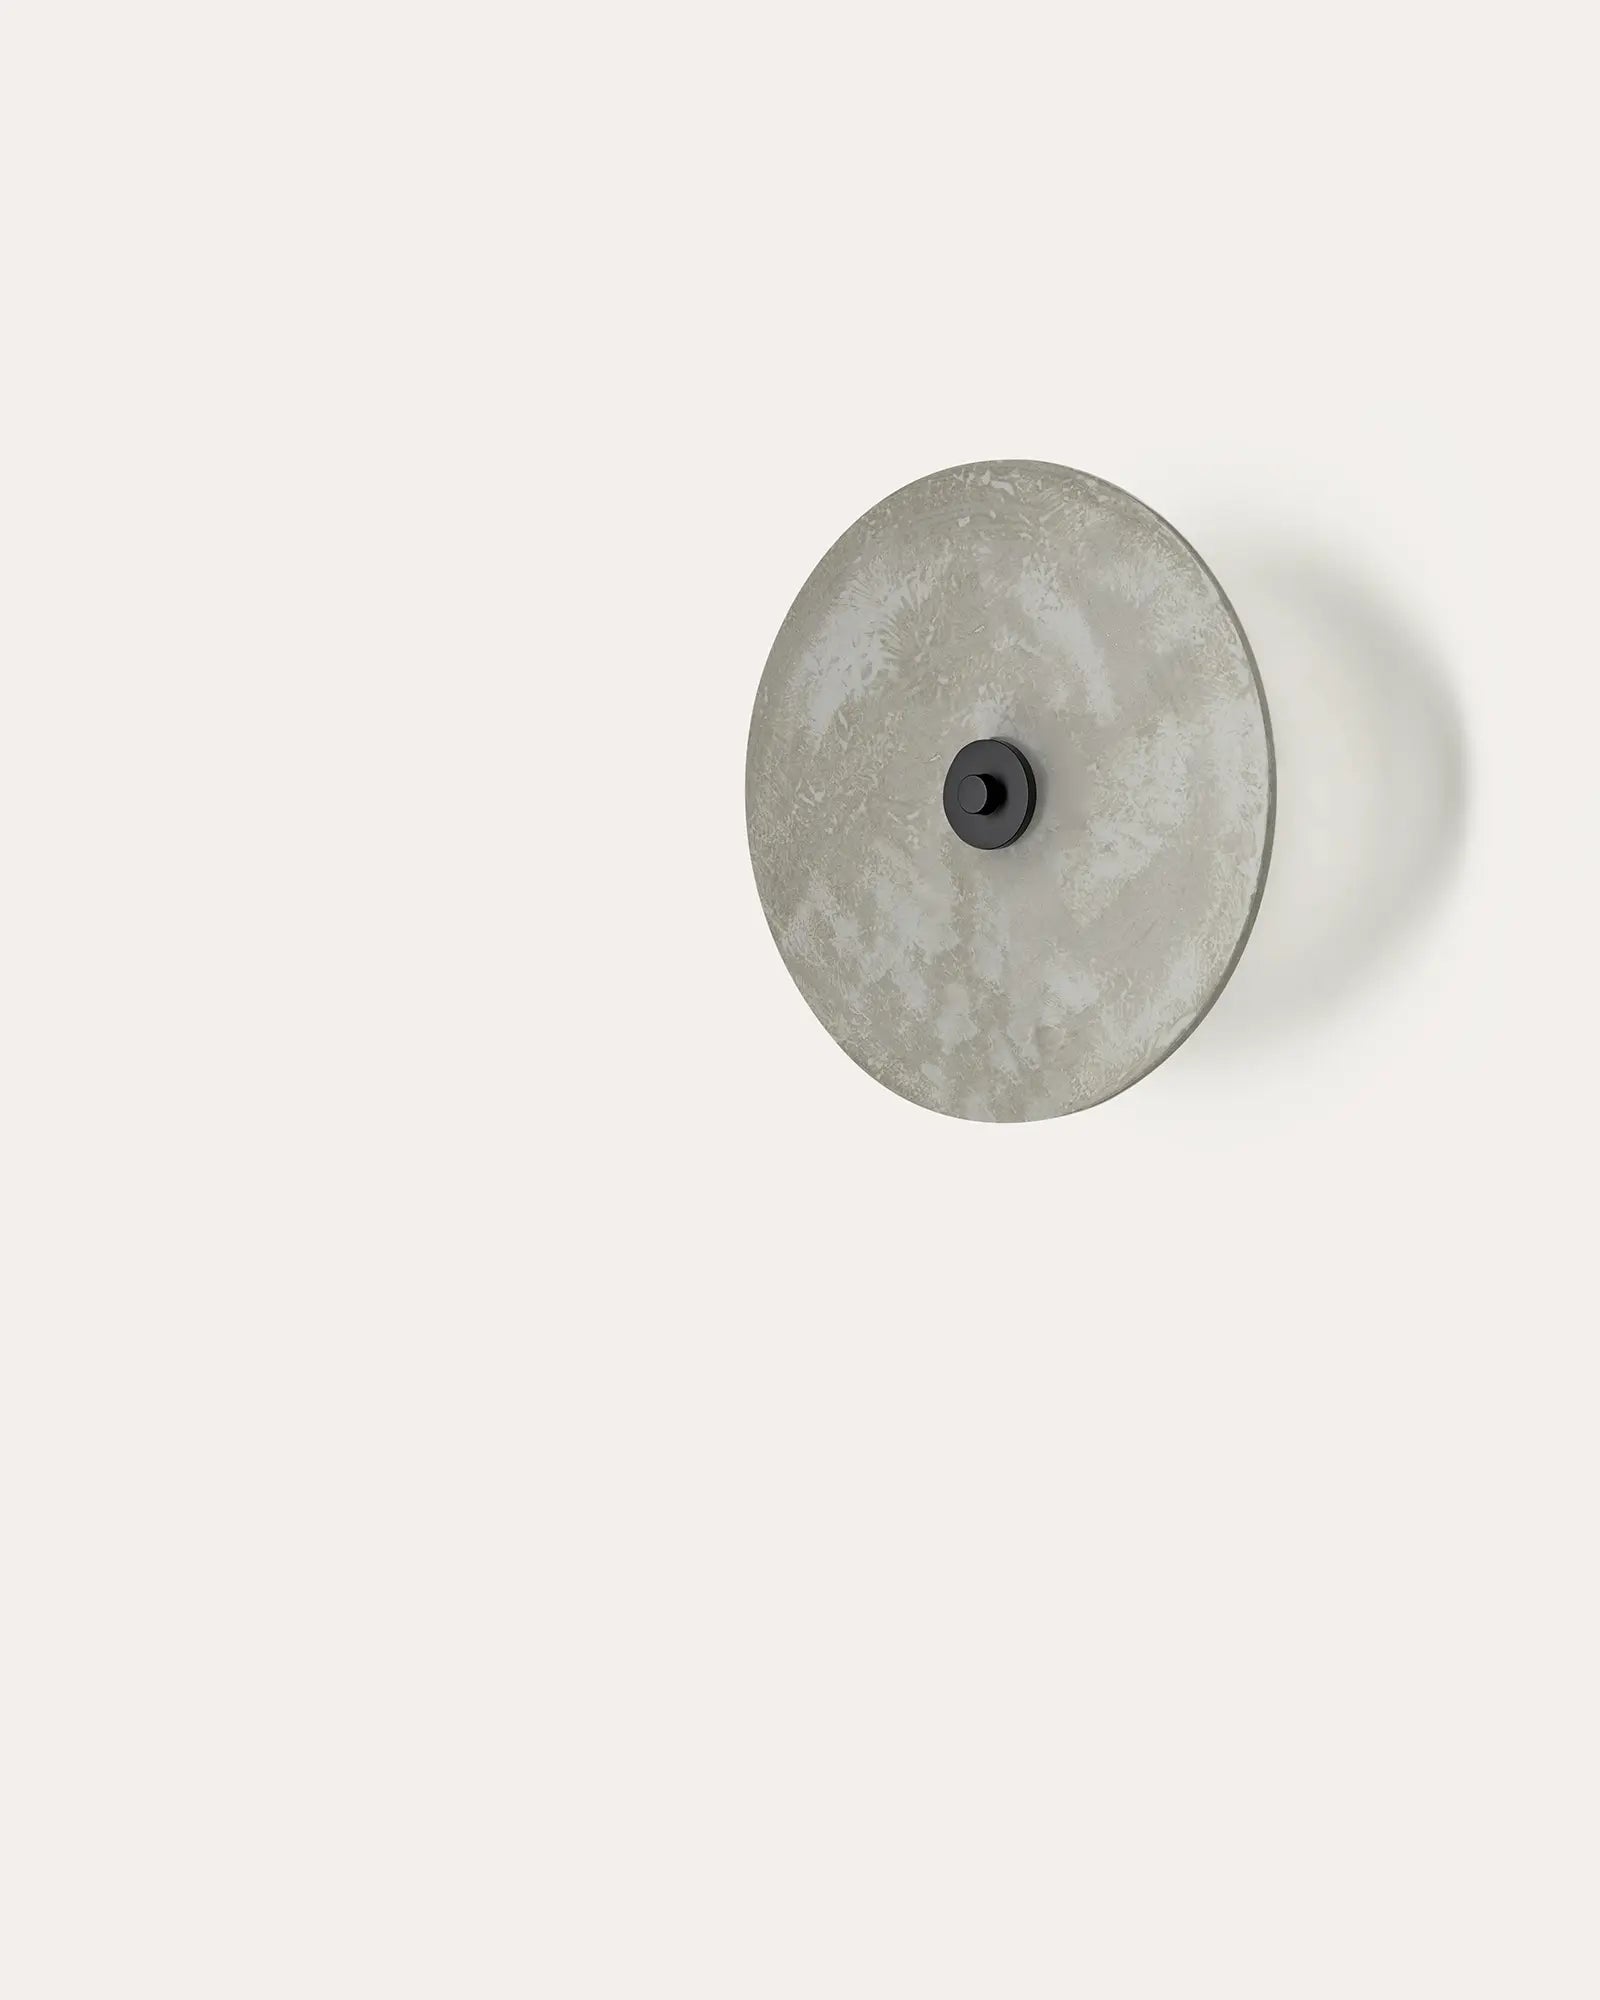 Sual minimali disc shade wall light in glass or alabaster 